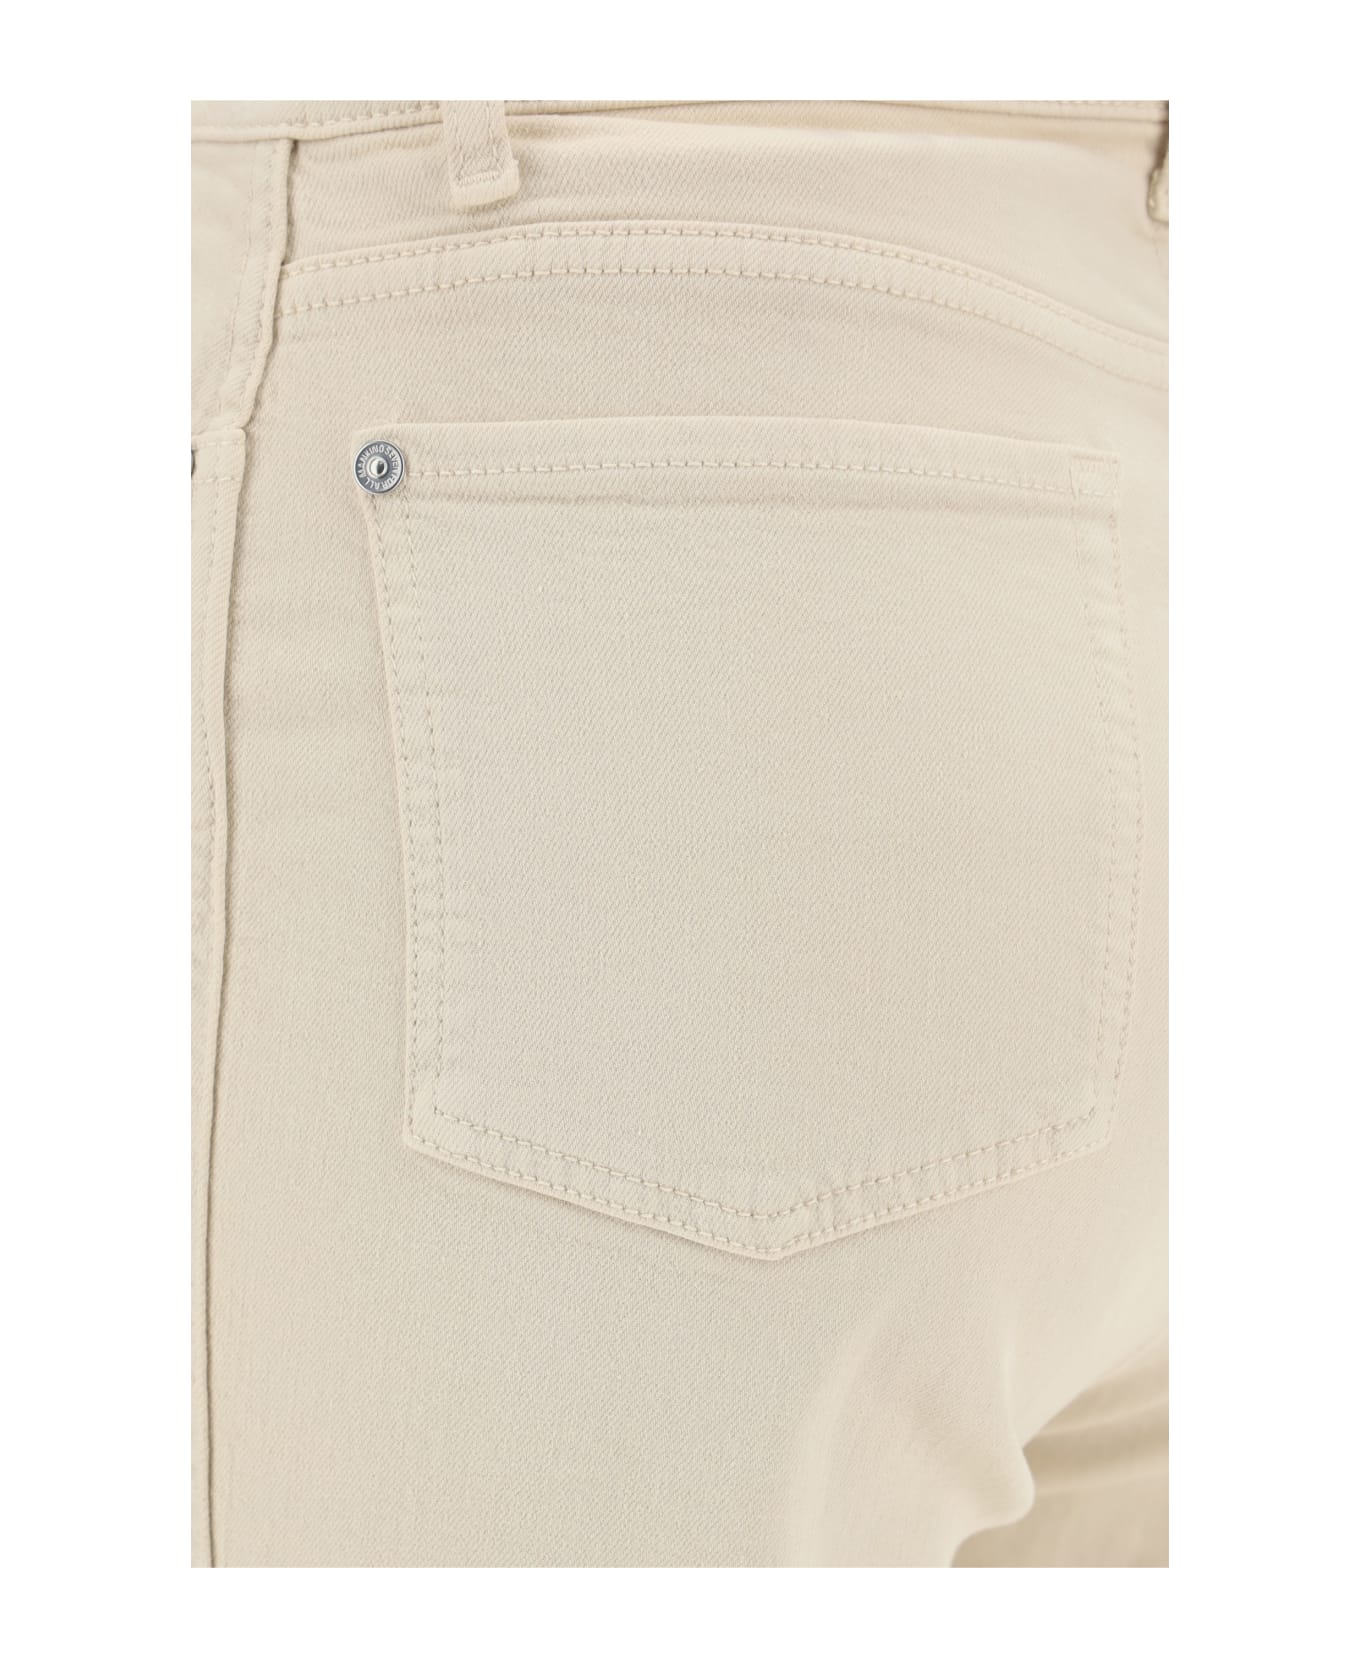 7 For All Mankind Pants - White ボトムス